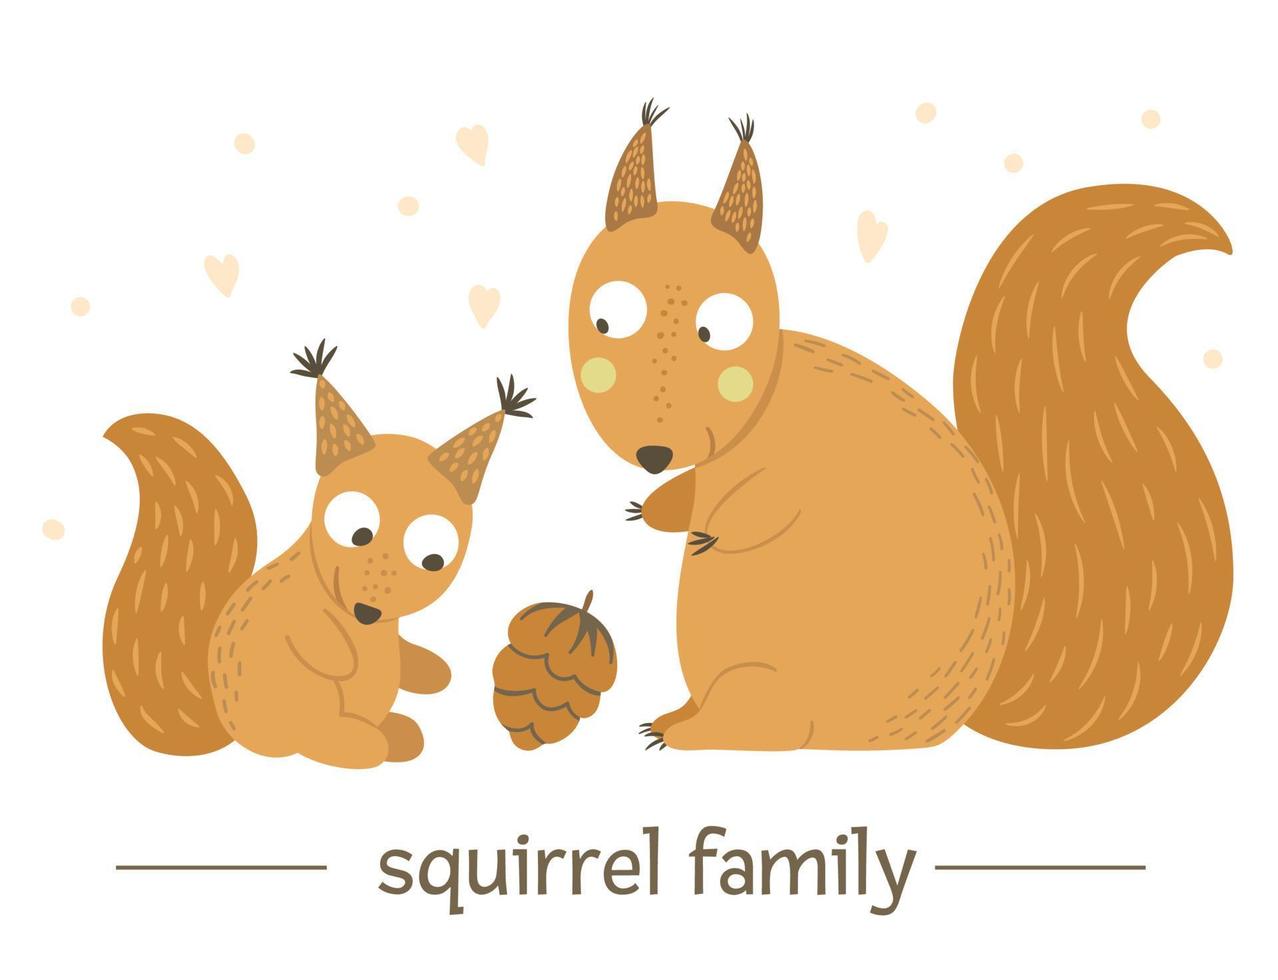 Vector hand drawn flat baby squirrel with parent. Funny woodland animal scene showing family love. Cute forest animalistic illustration for children design, print, stationery